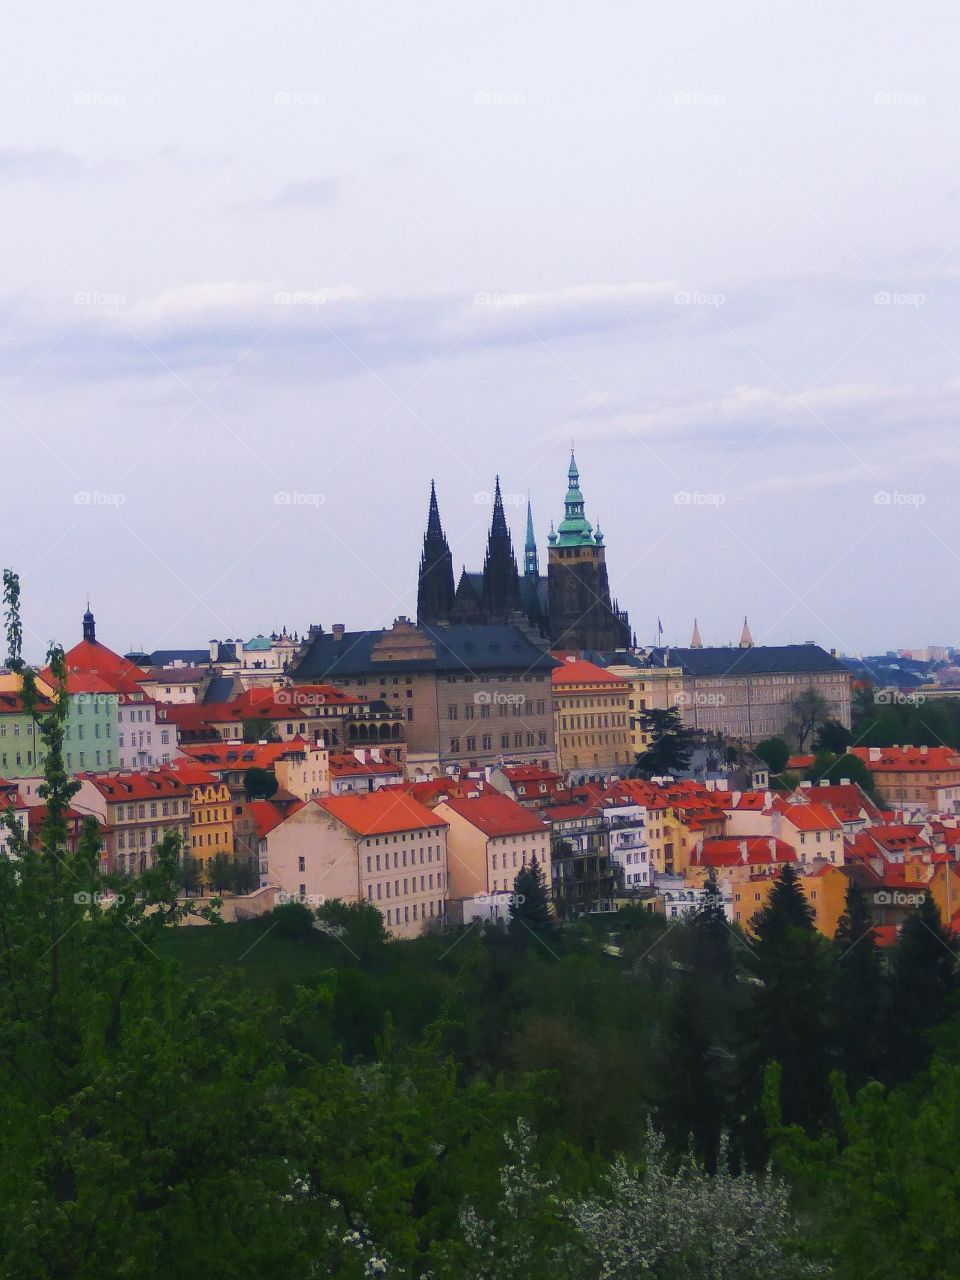 The Prague Castle and St Vitus Cathedral